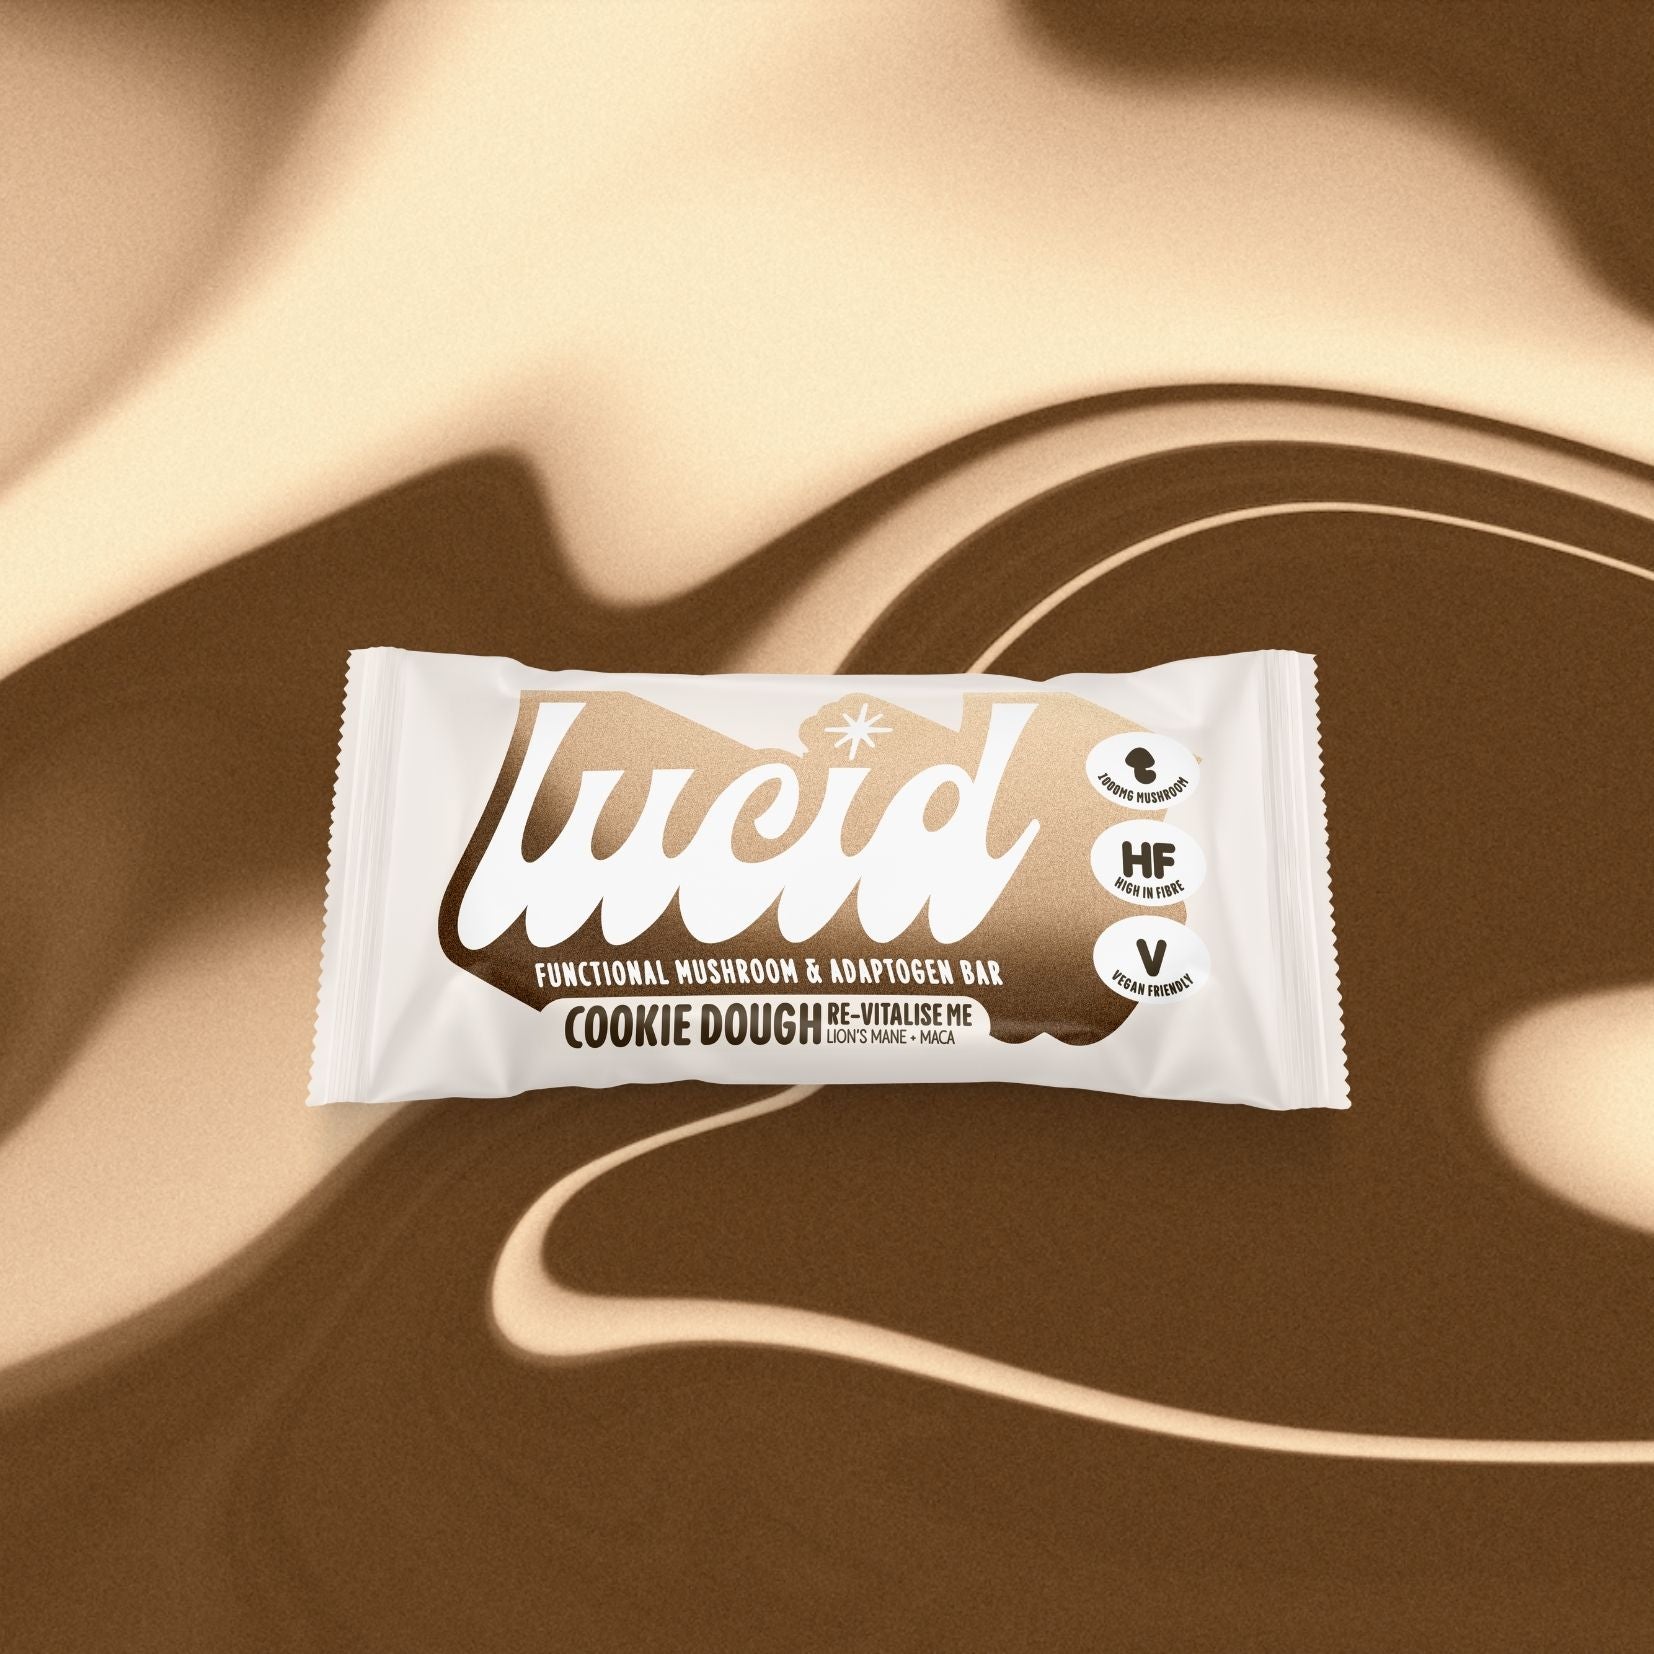 Lucid's energy boosting Cookie Dough Snack Bar infused with functional mushrooms and adaptogens.